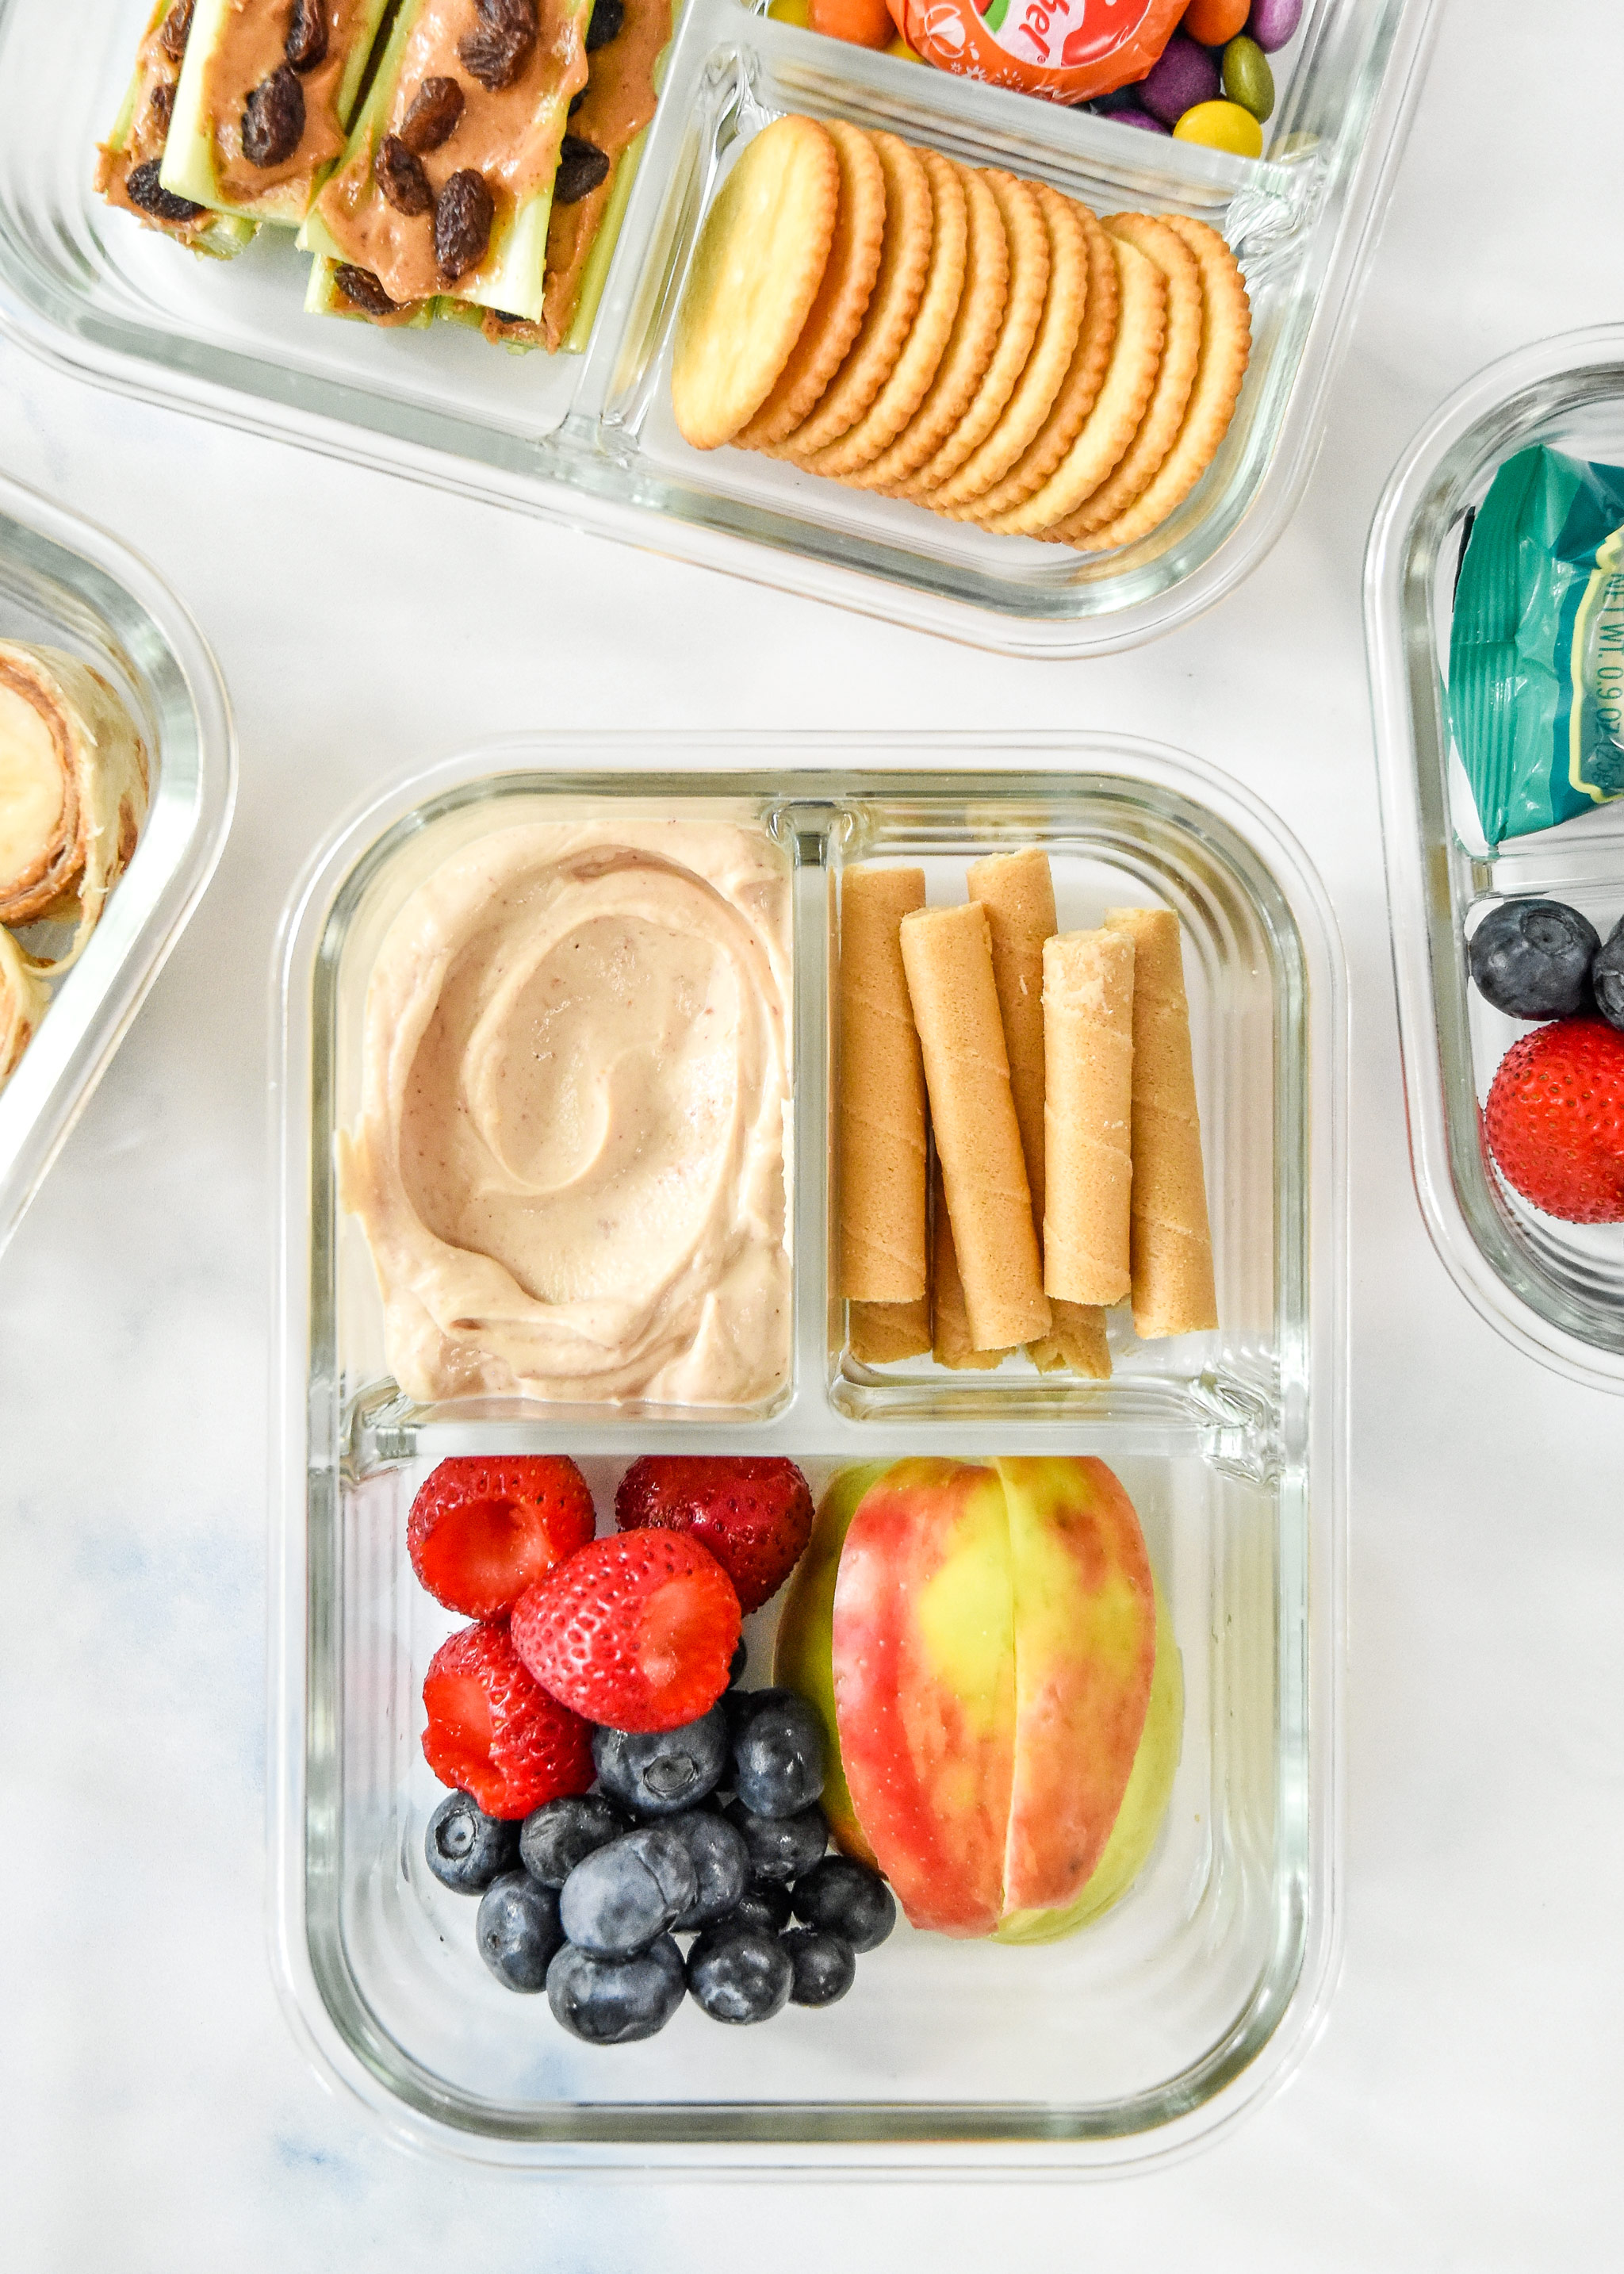 peanut butter yogurt dip with fruit and wafers in a glass meal prep container.